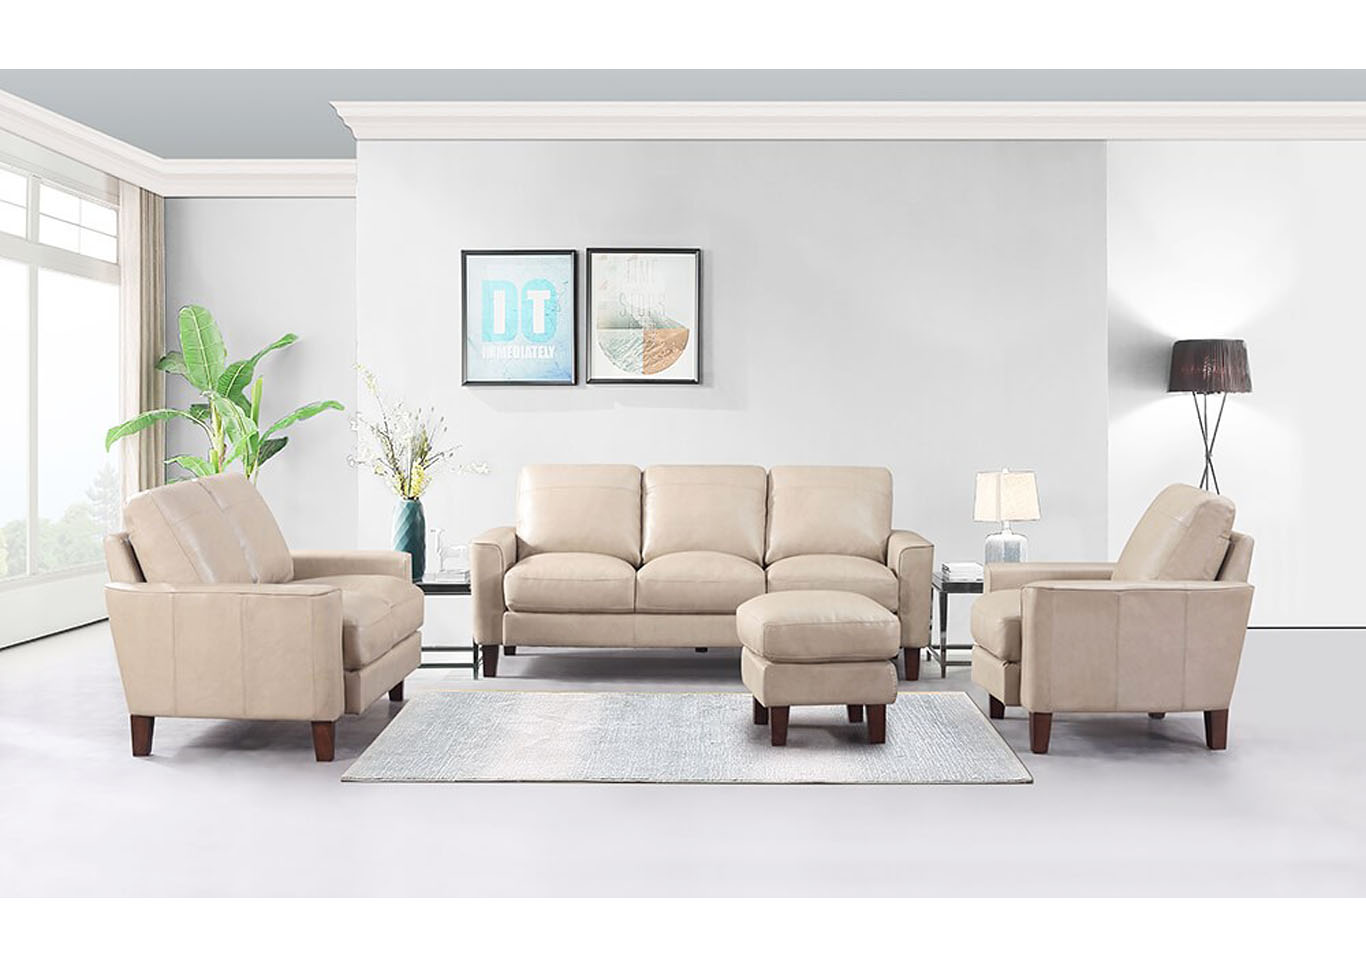 Chino Top Grain Leather Sofa and Love Seat - Beige,Instore